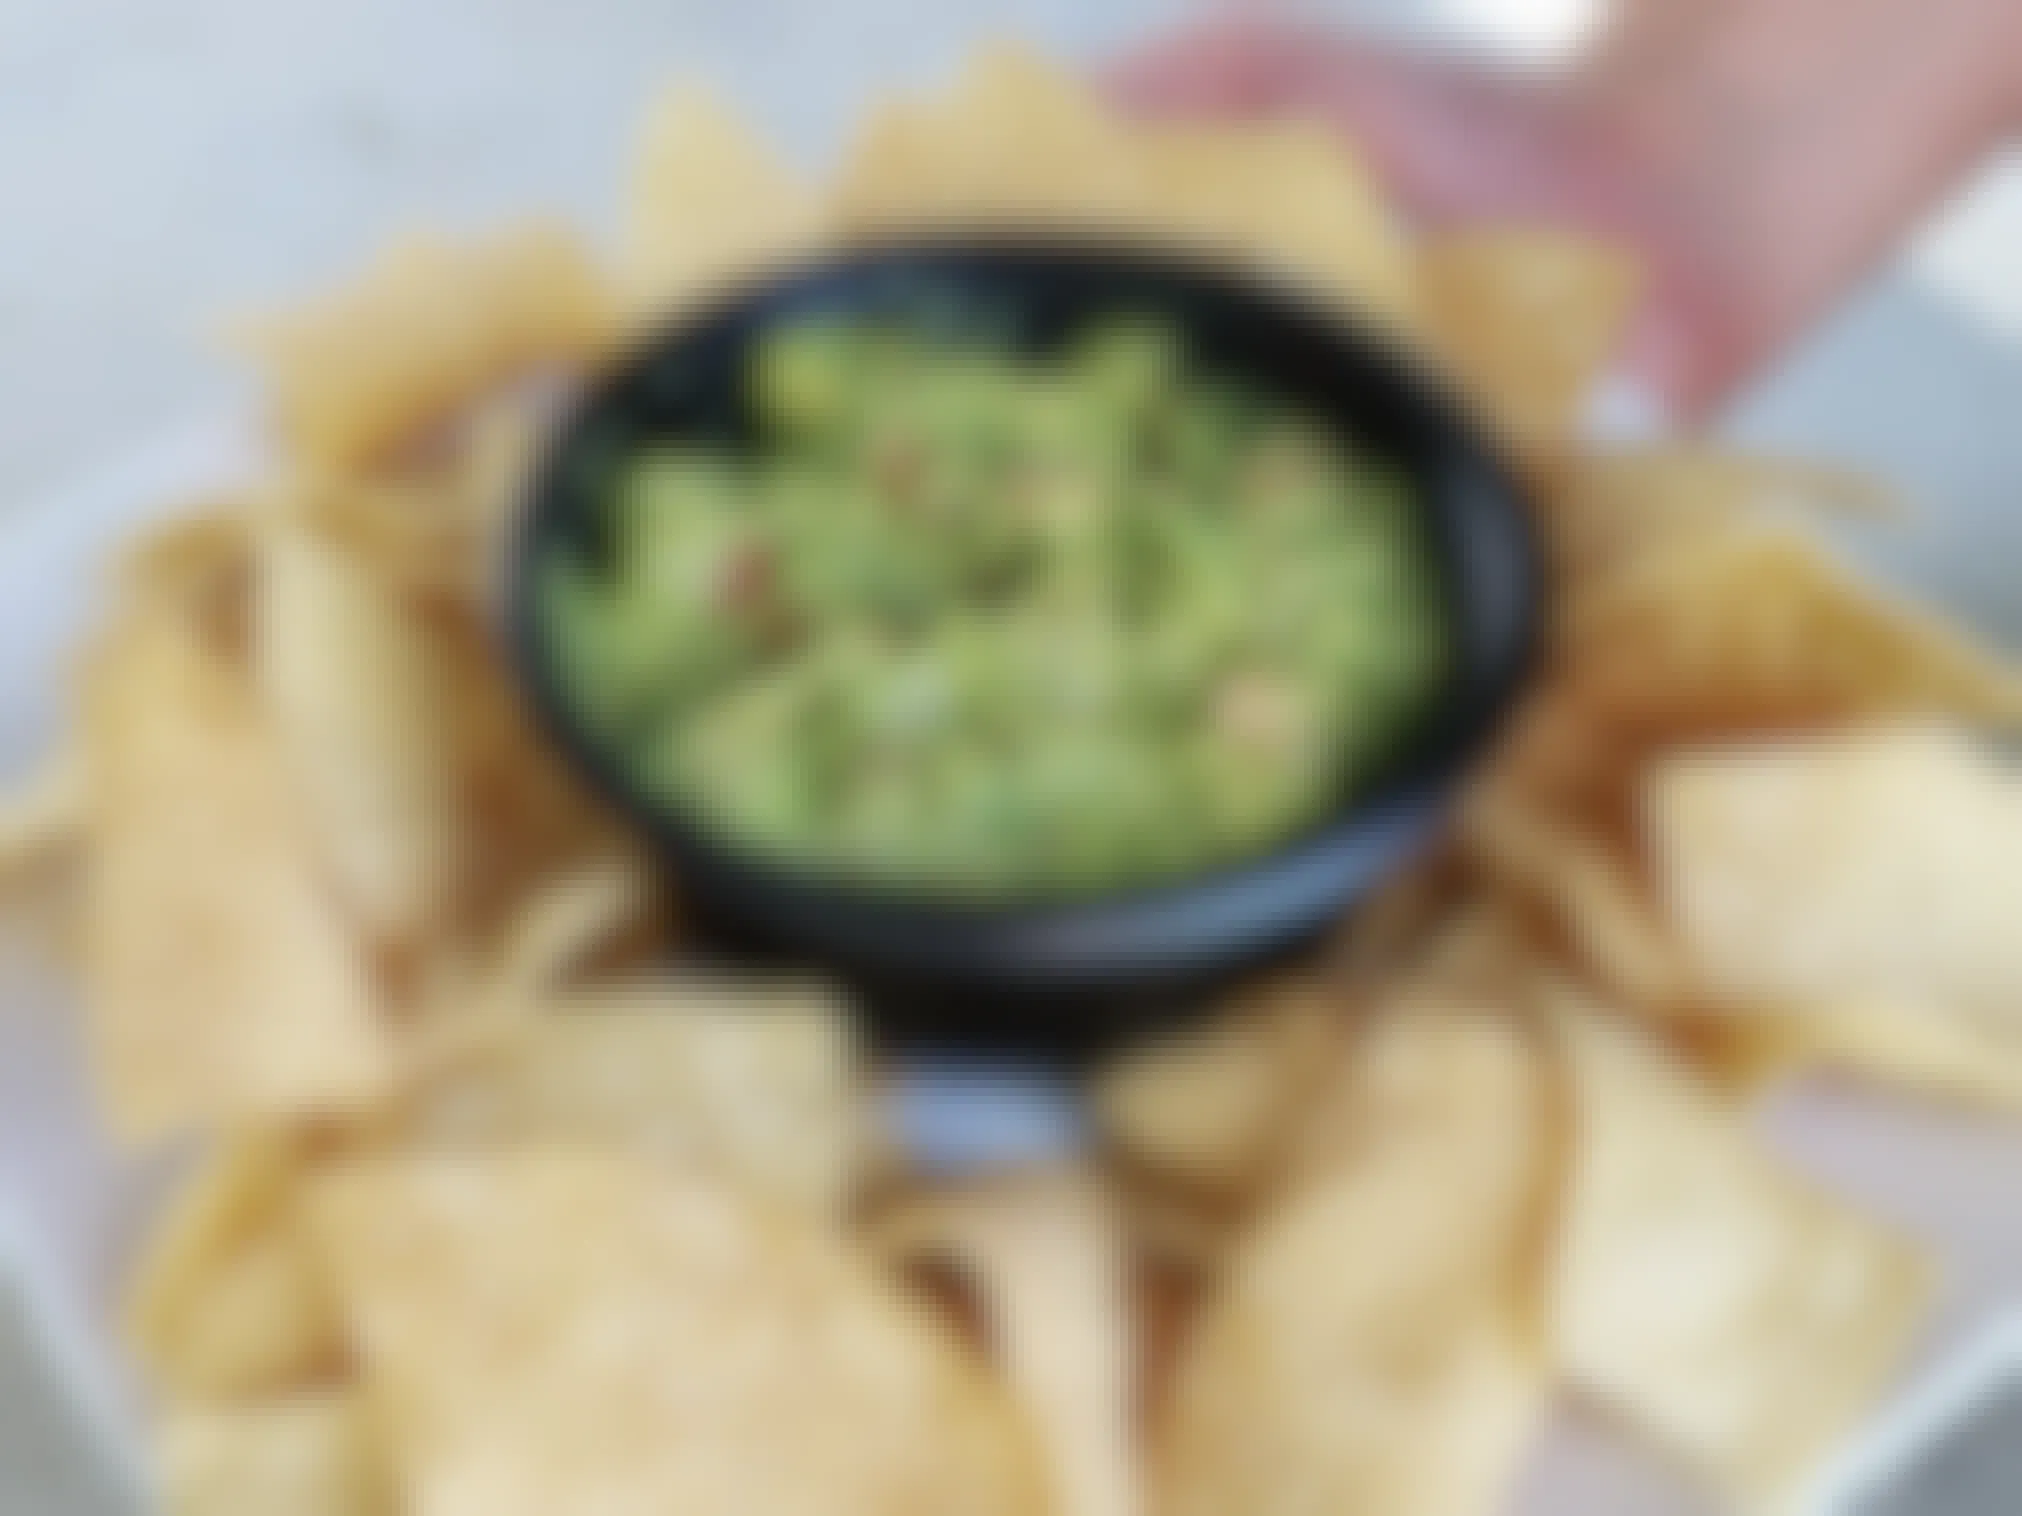 A person's hand putting down a plate of chips with a small bowl of guacamole in the center of the chips.